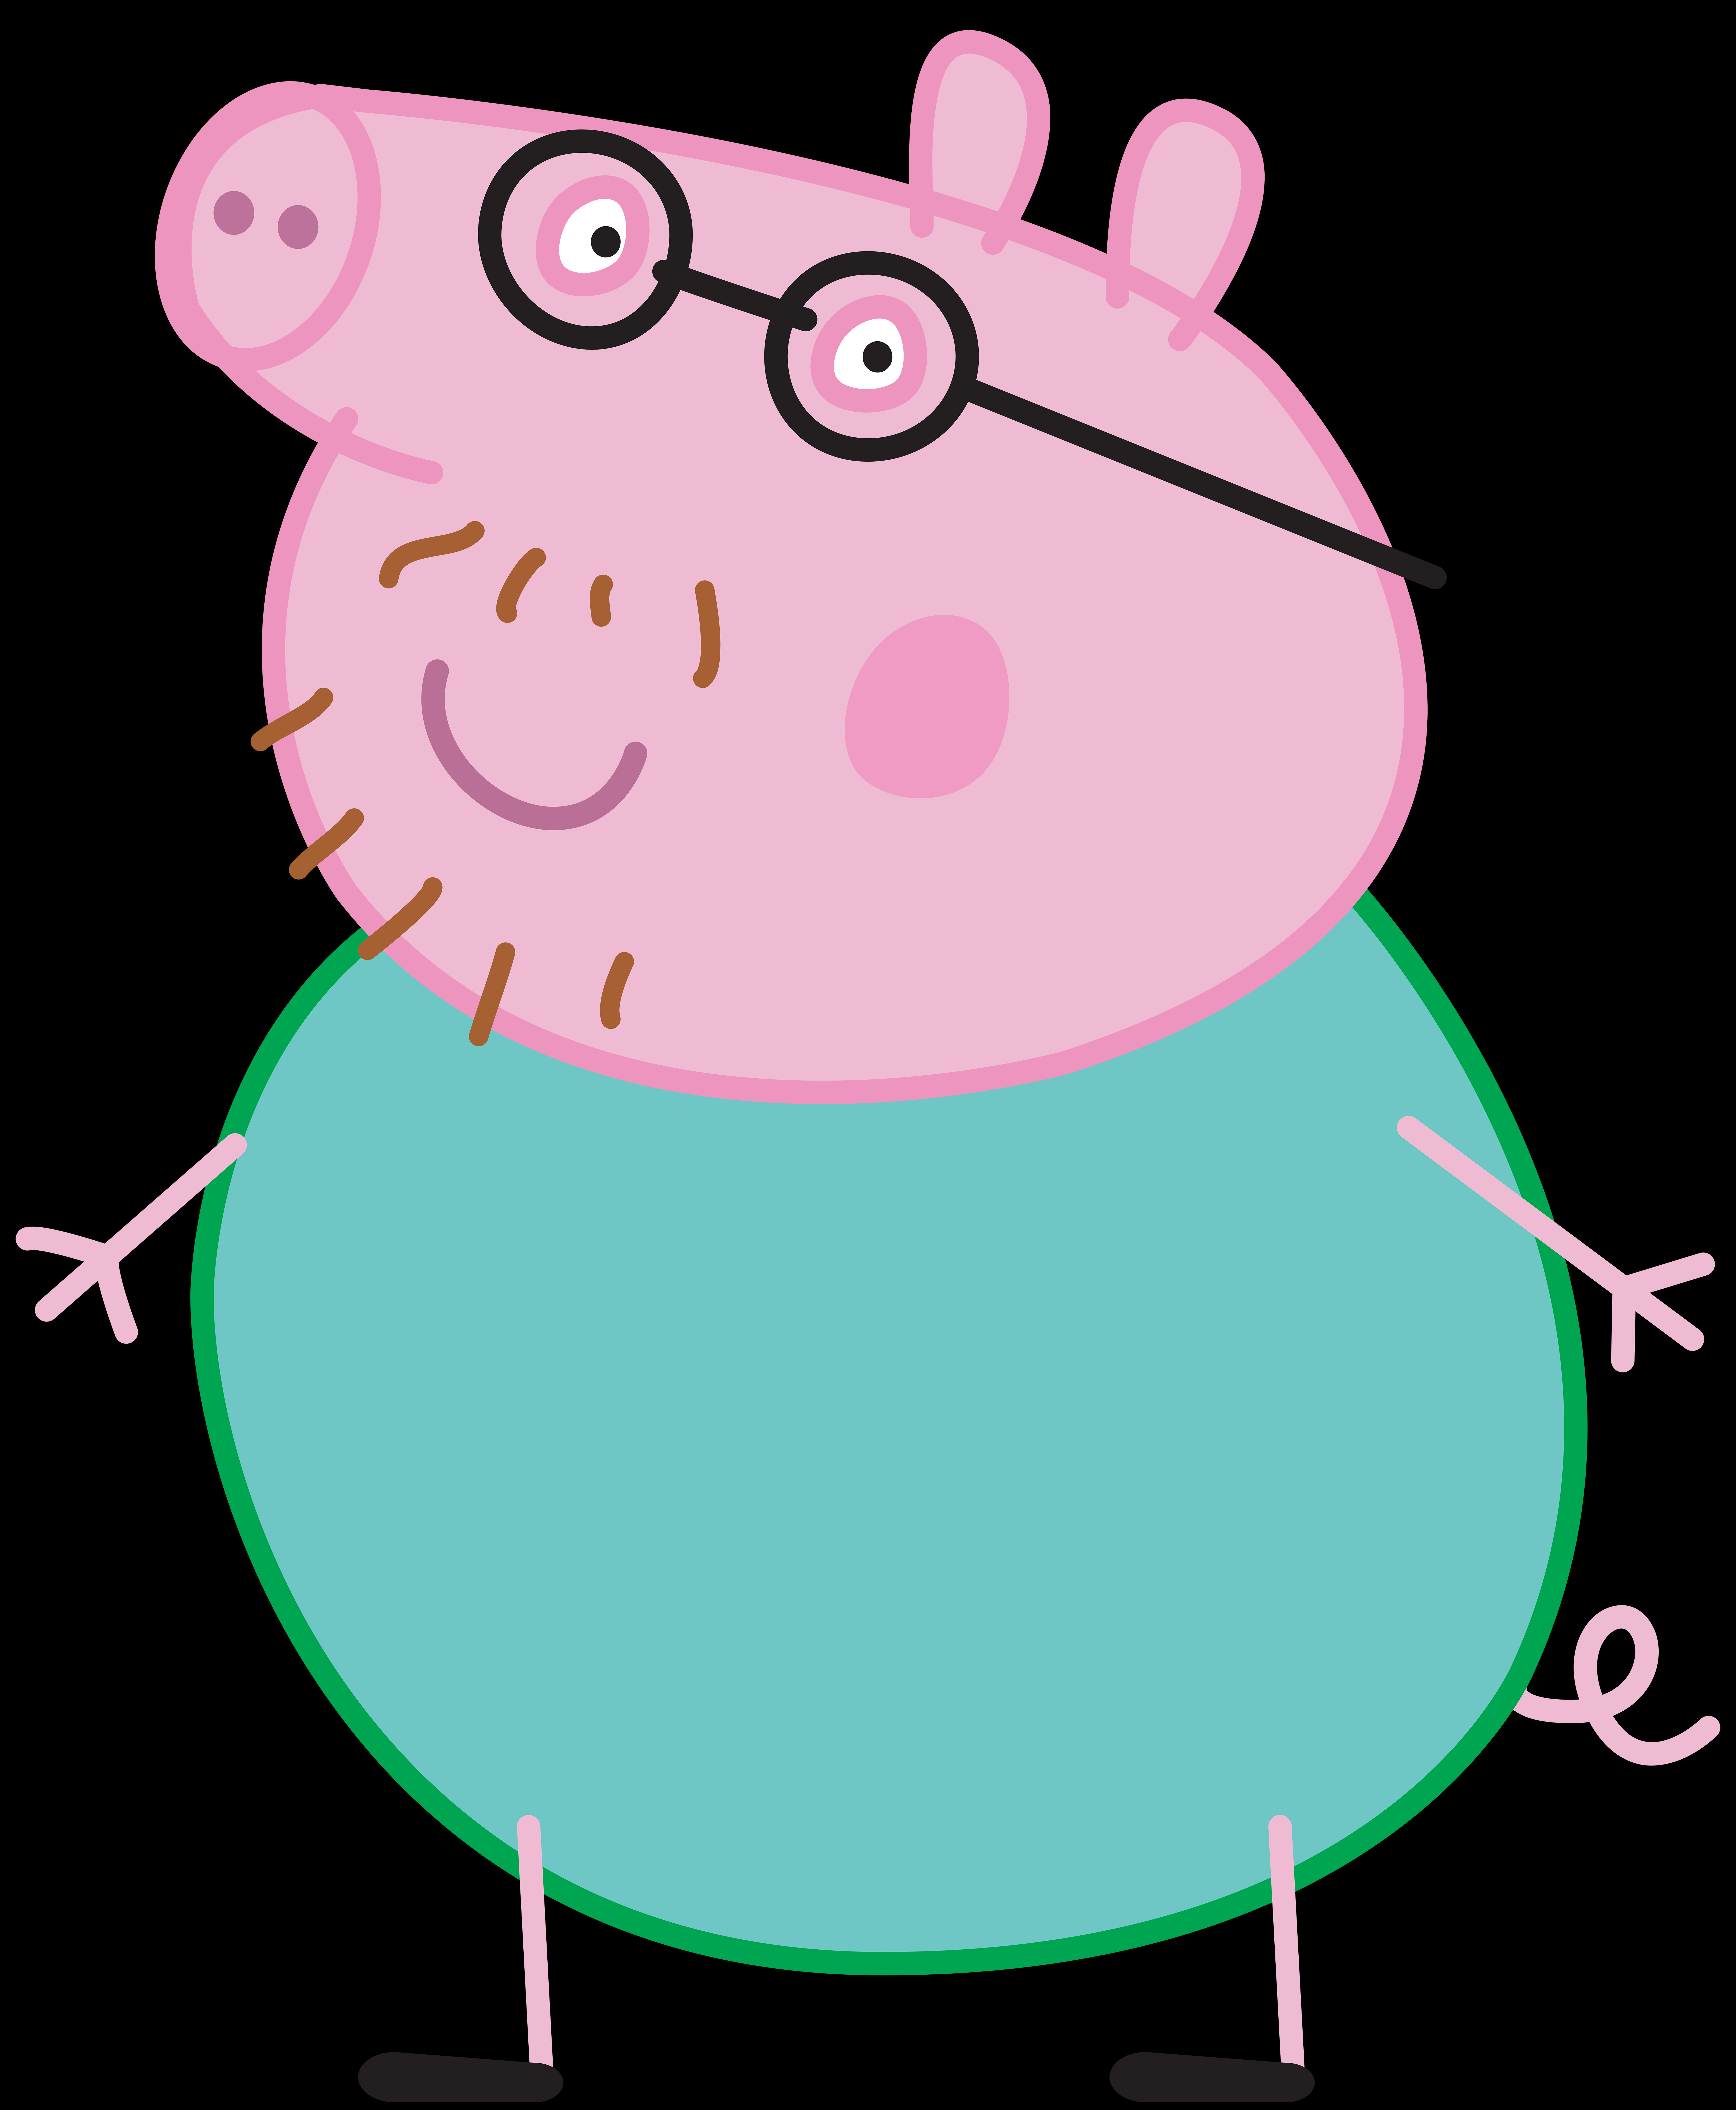 Daddy Pig Peppa Pig Transparent PNG Image Gallery Yopriceville